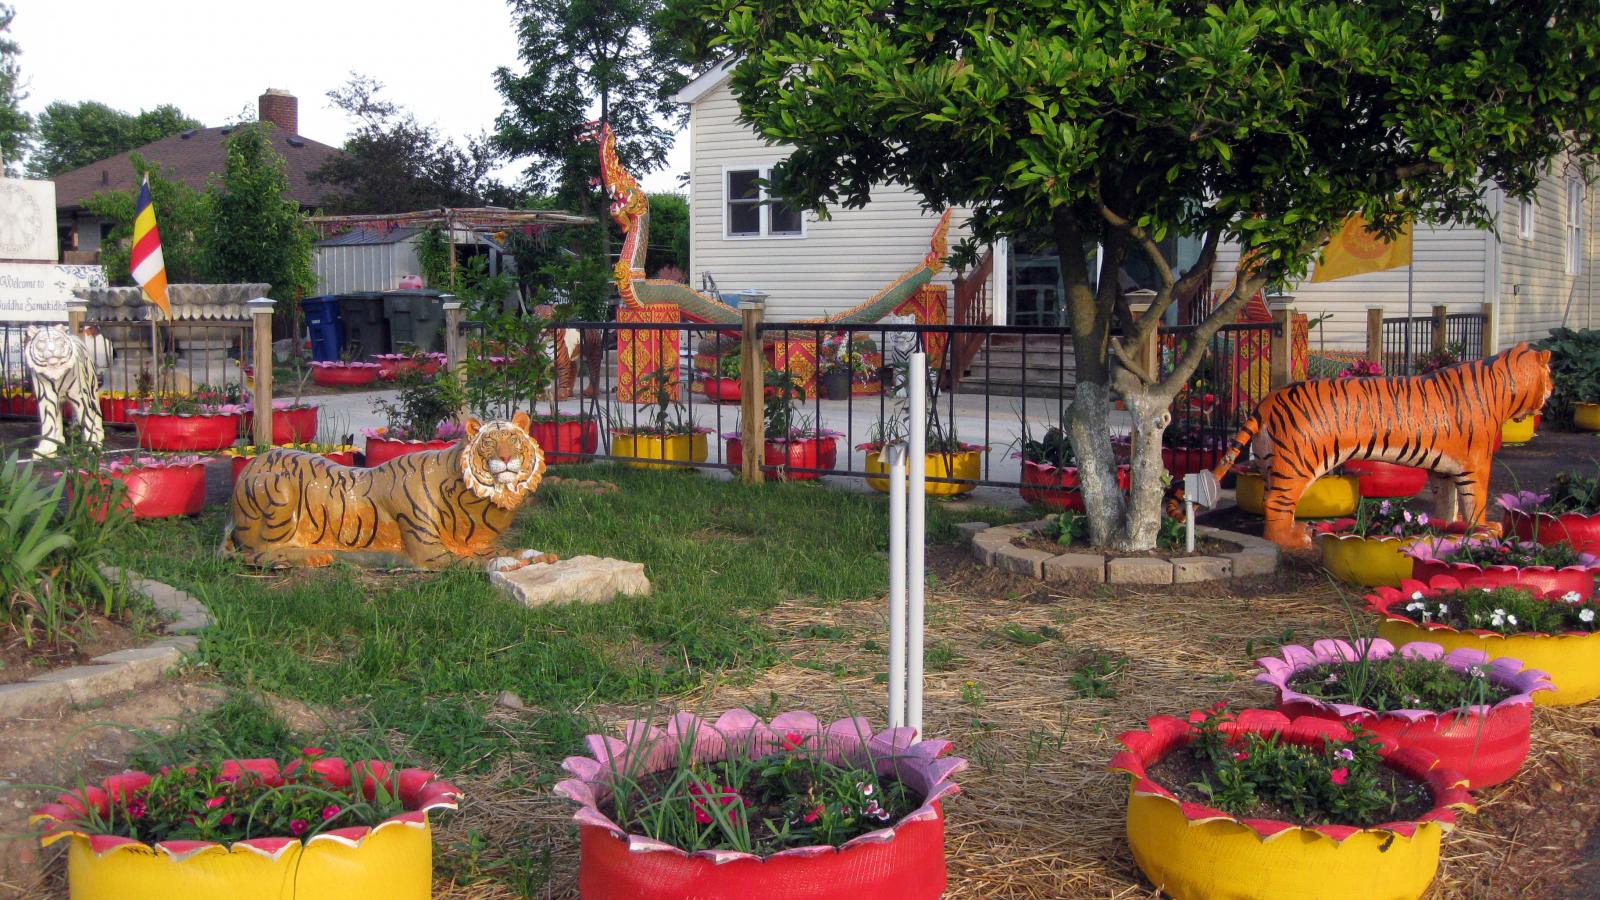 The yard outside the home/temple is elaborately decorated with painted concrete animals and colorful up-cycled tire planters, all of which were created by the various monks that have lived in Wat Buddhasamakidham.